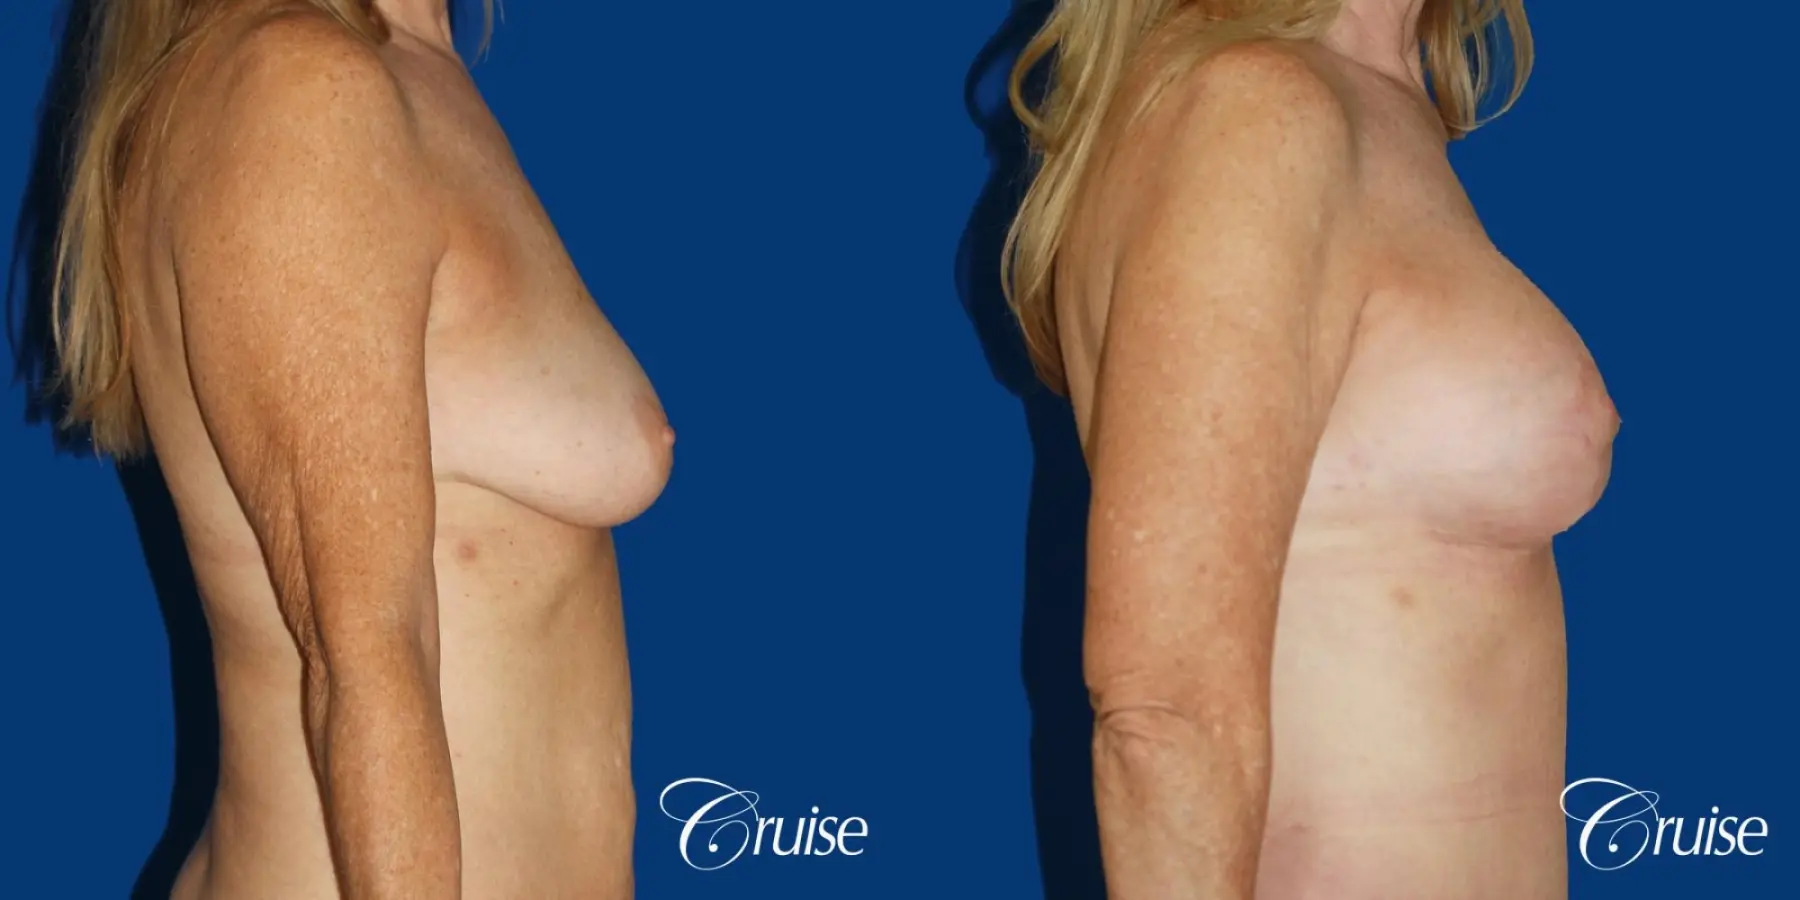 62 yr old woman with breast lift anchor and silicone implants - Before and After 2